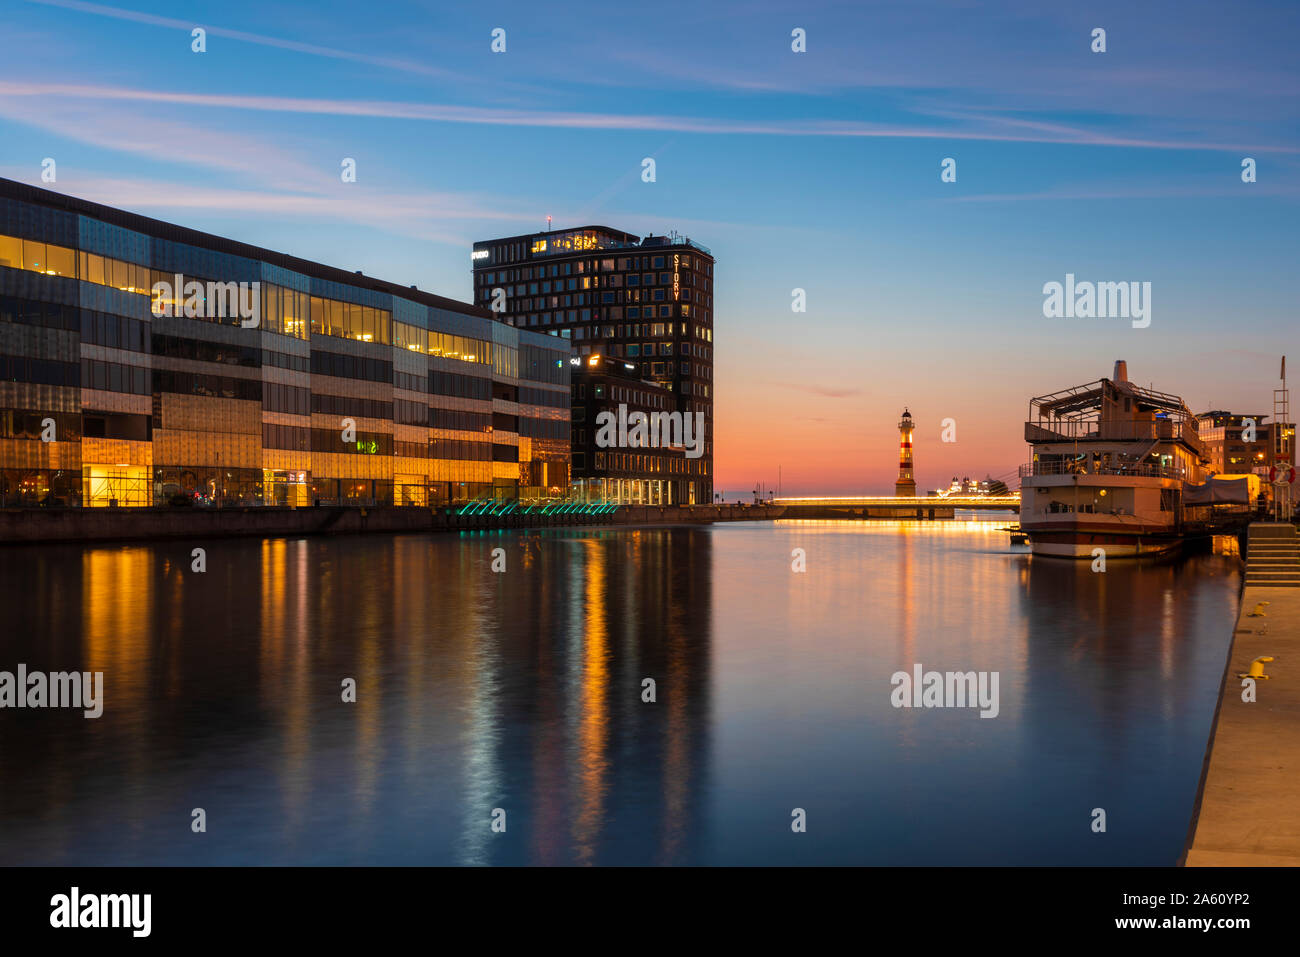 Illuminated buildings by river against sky in Malmo, Sweden Stock Photo